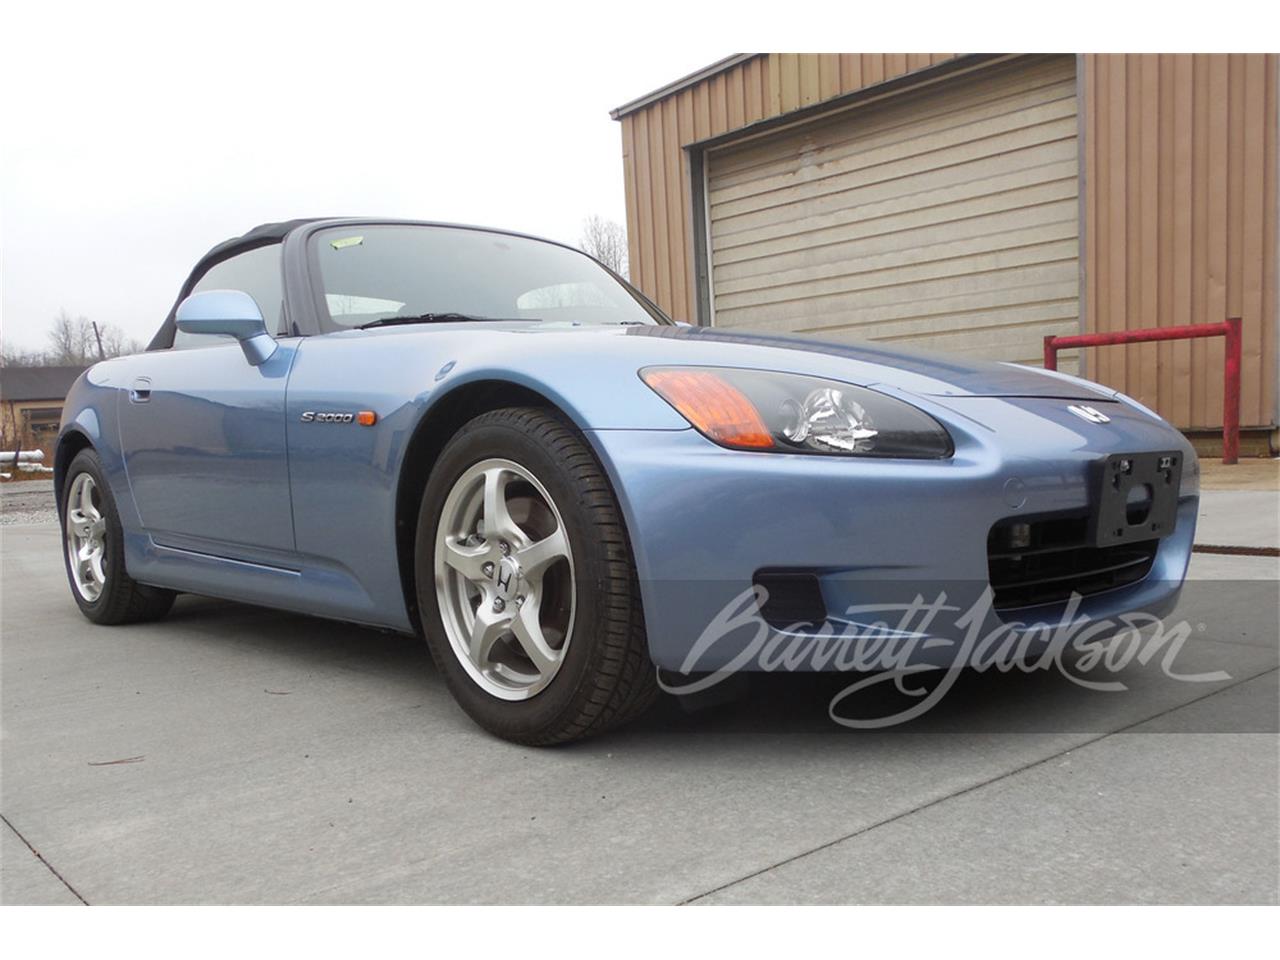 For Sale at Auction: 2002 Honda S2000 in Scottsdale, Arizona for sale in Scottsdale, AZ